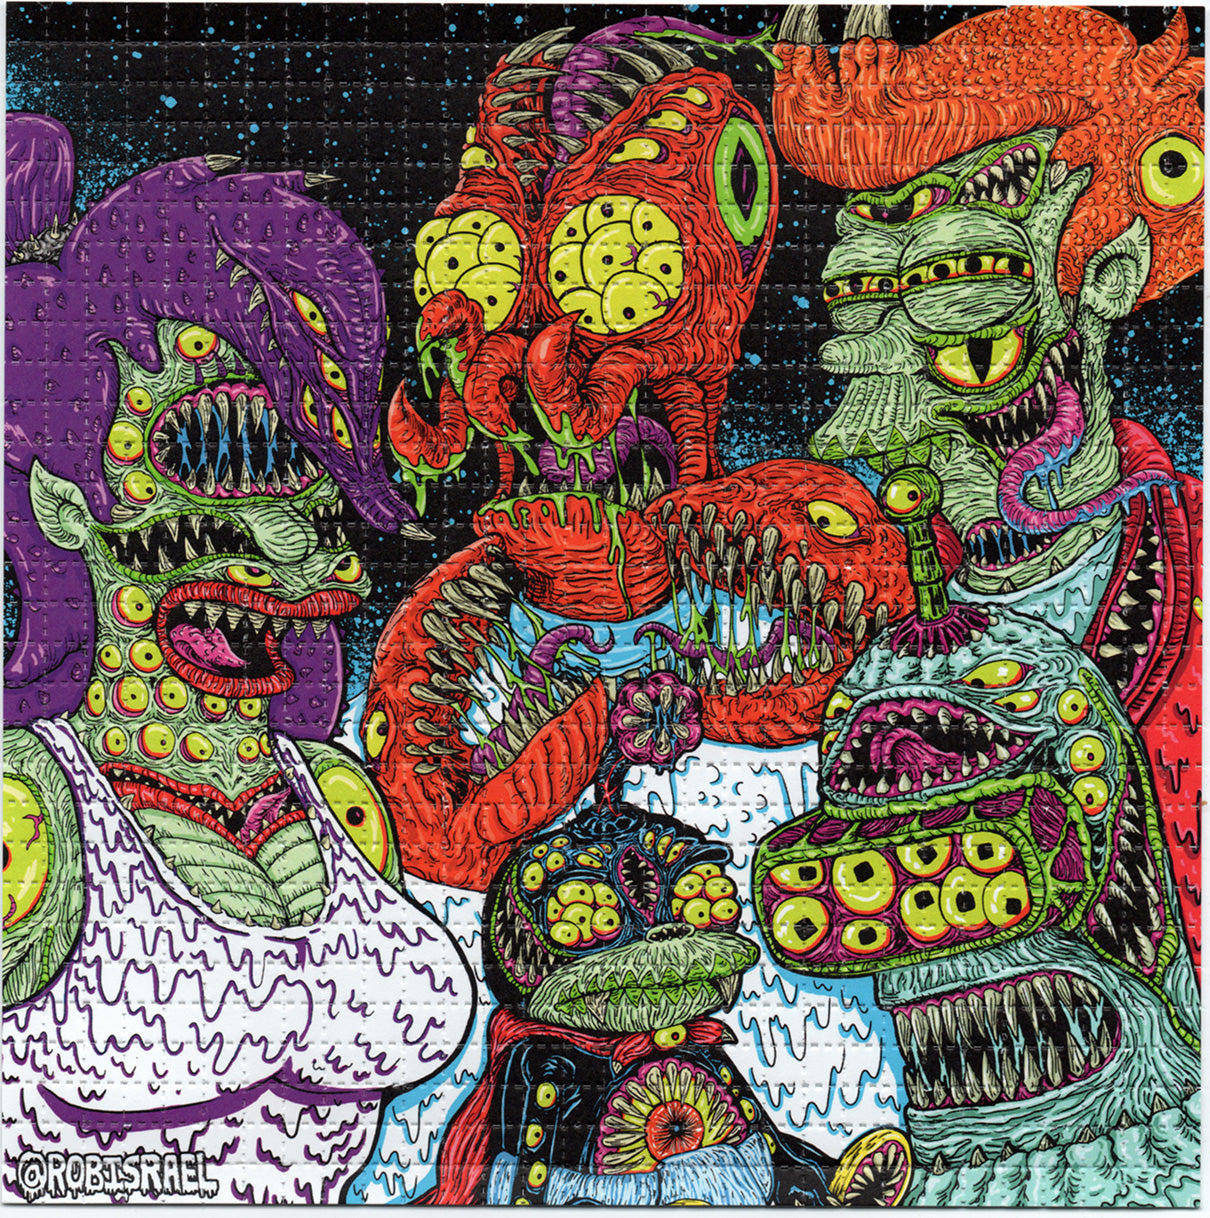 Future Space Gang by Rob Israel Limited Edition LSD blotter art print